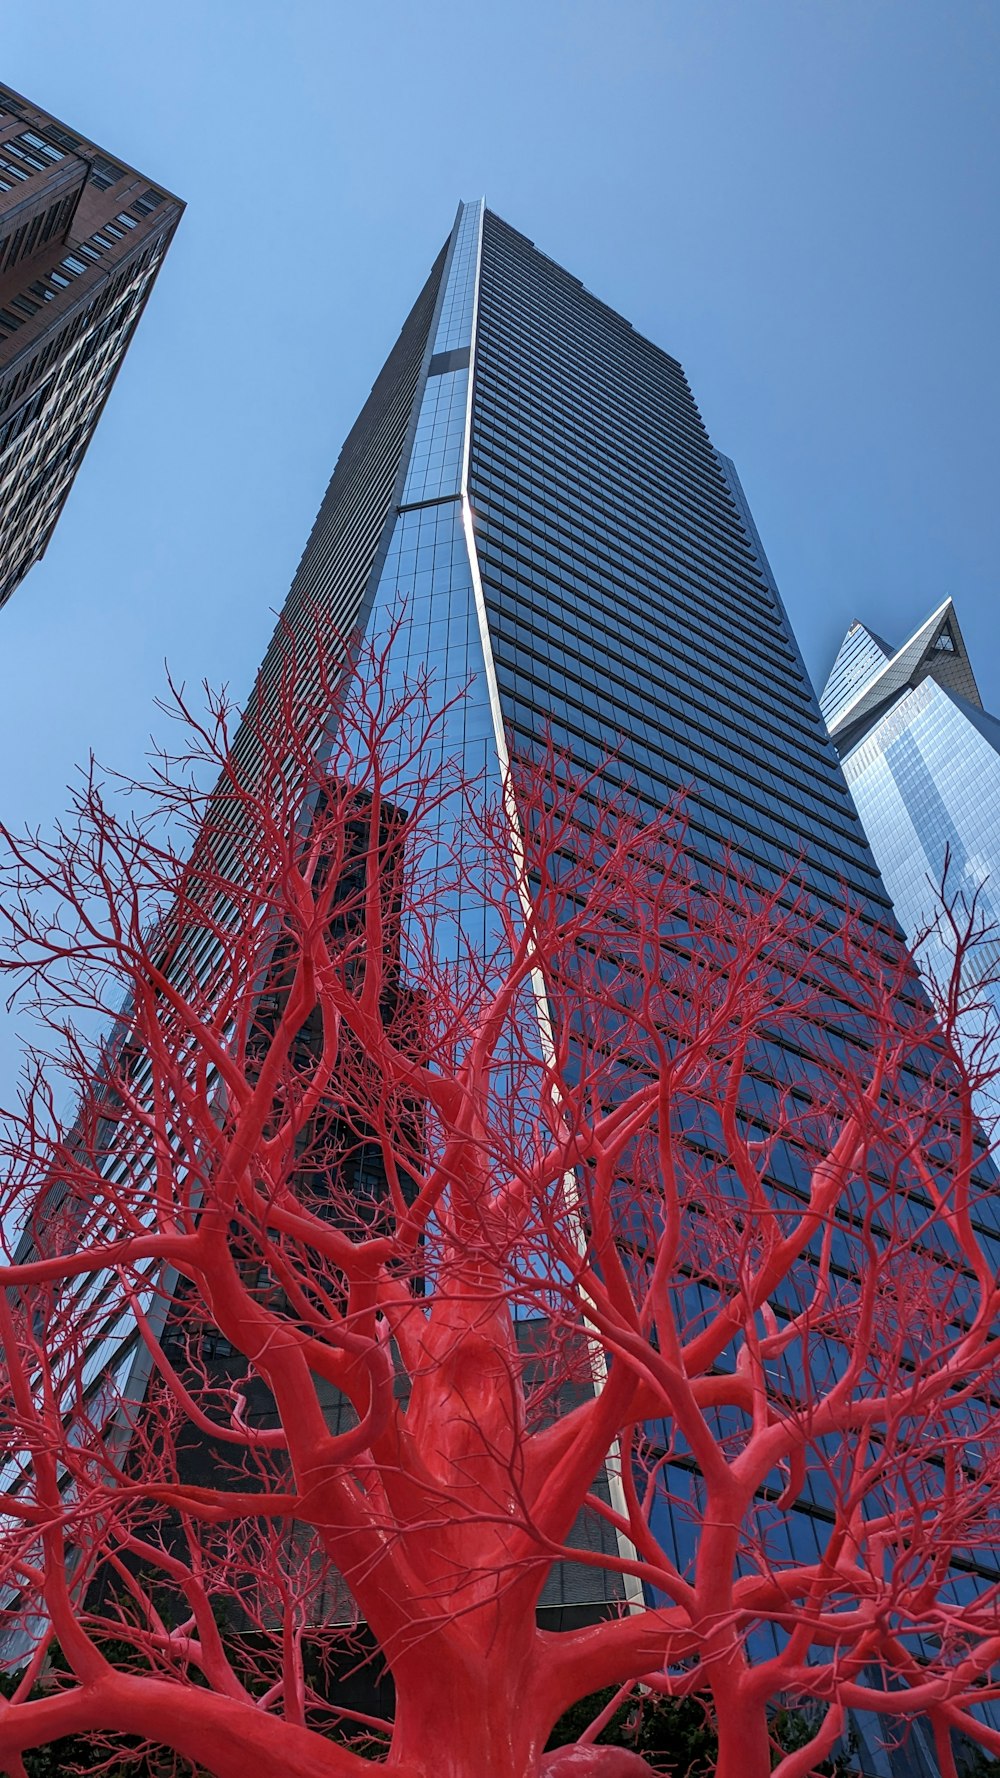 a red sculpture in front of a tall building